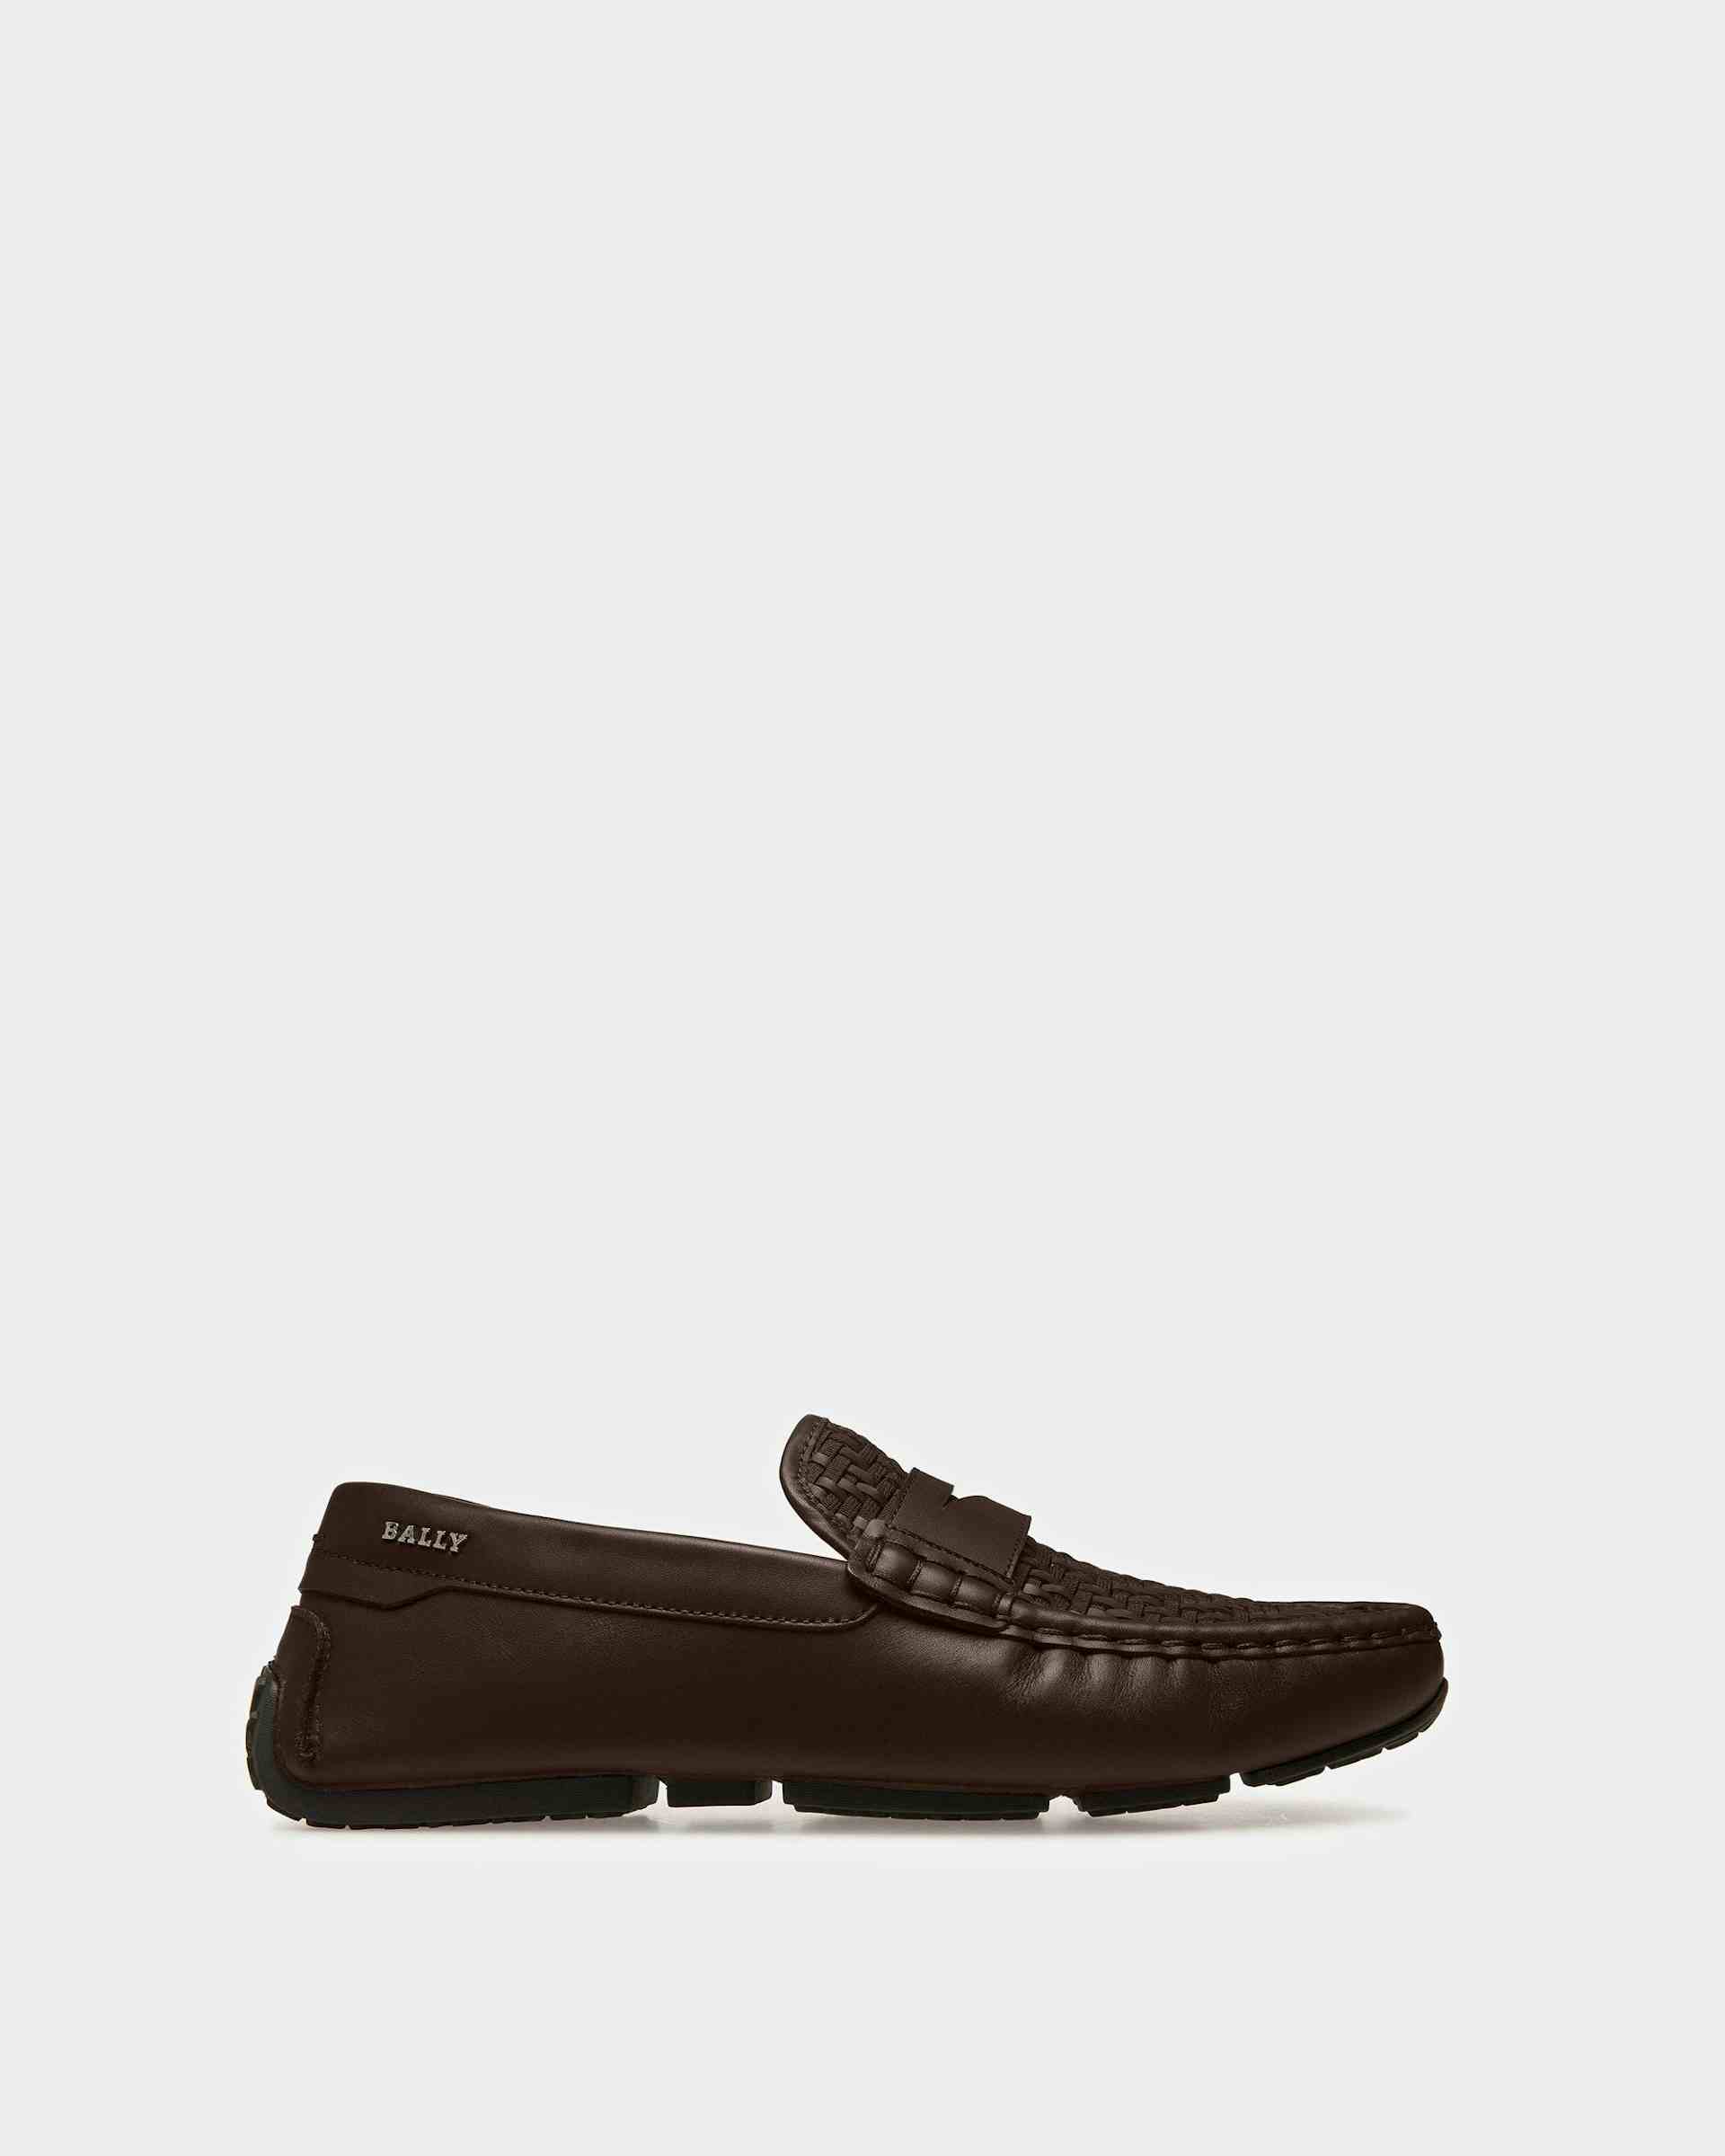 Pilos Leather Drivers In Brown - Men's - Bally